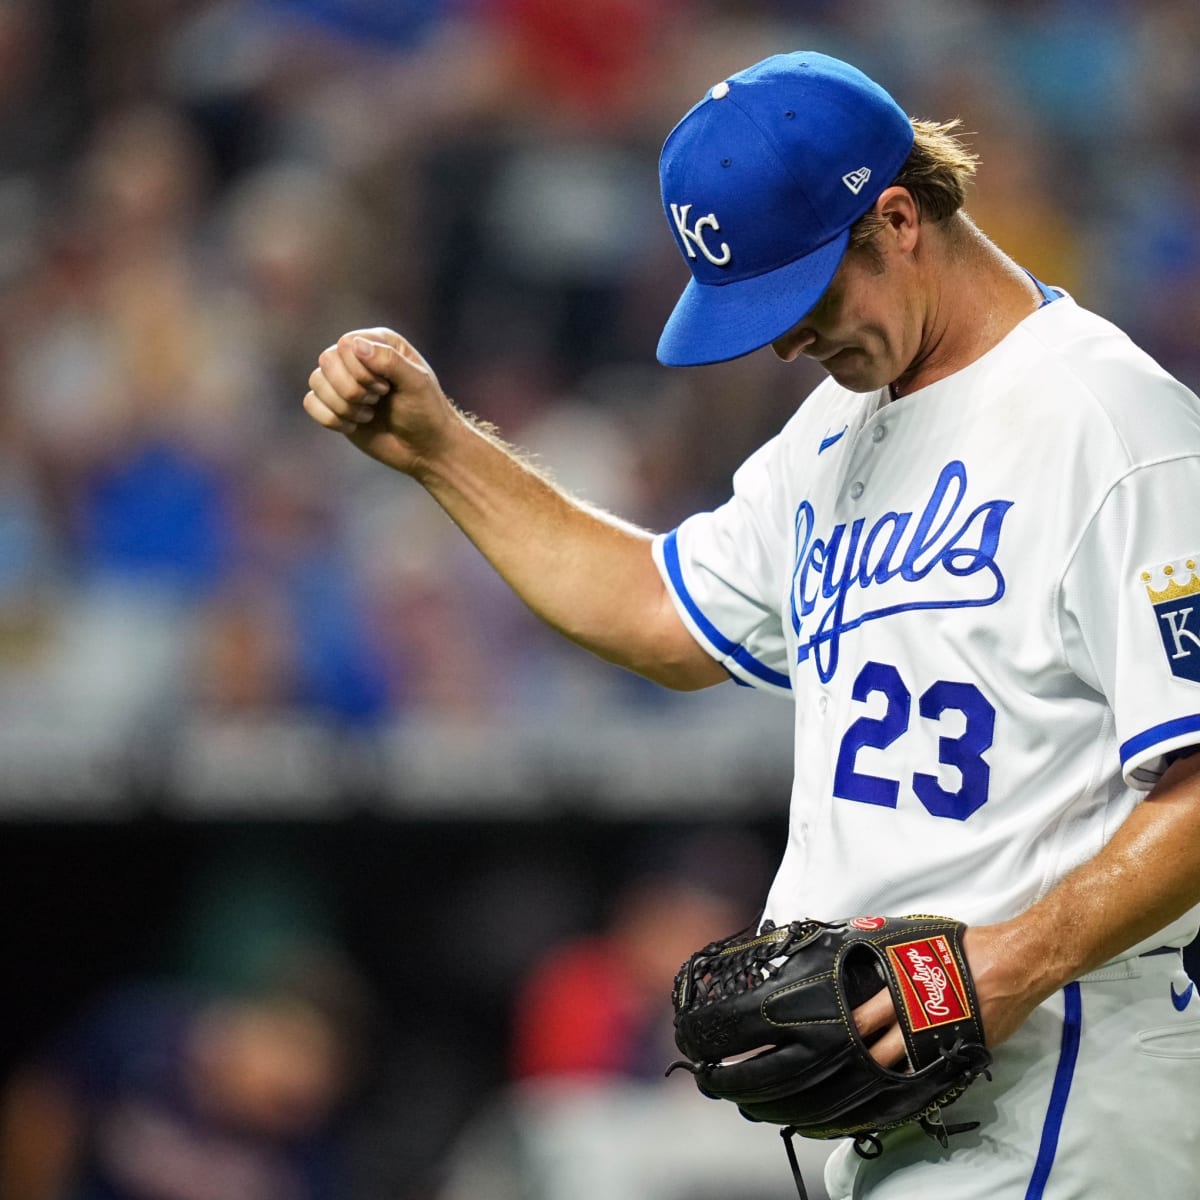 WATCH: Zack Greinke Picks Up 1,000th Strikeout as Member of Royals -  Fastball